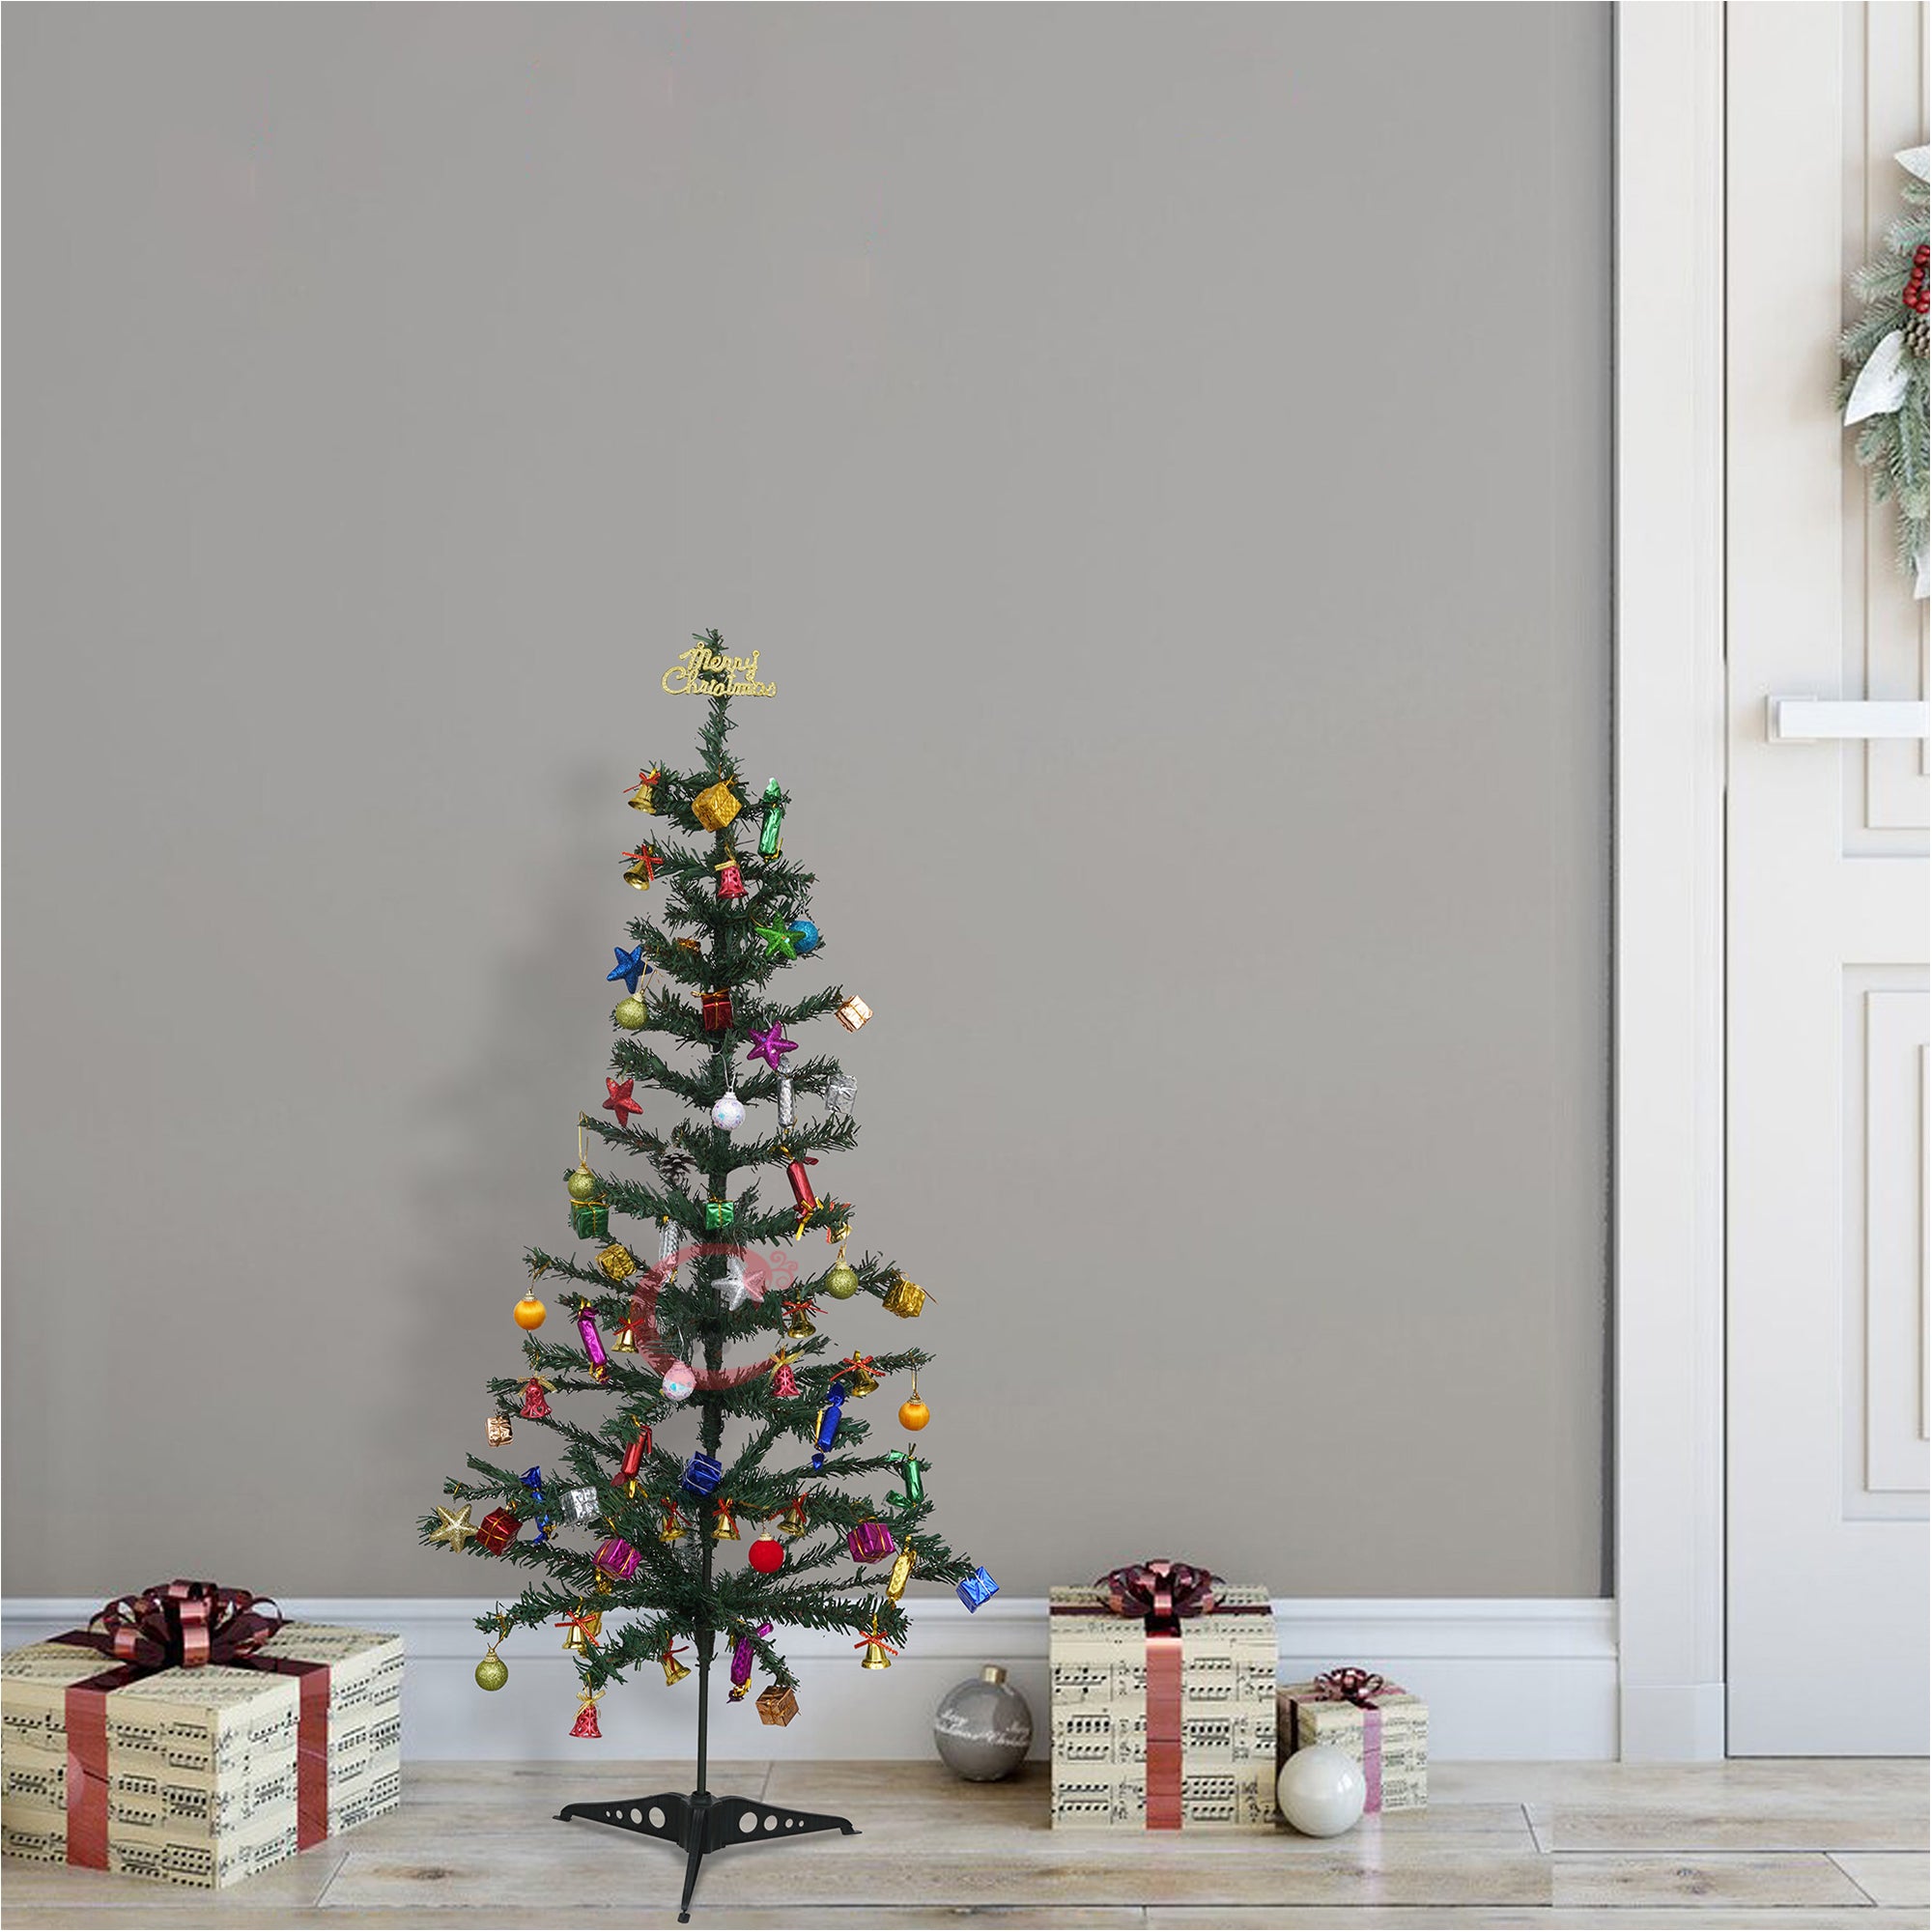 eCraftIndia 3 Feet Green Artificial Christmas Tree Xmas Pine Tree with Metal Stand - Xmas Tree for Indoor, Outdoor, Home, Living Room, Office, Church Decor - Merry Christmas Decoration Item 4